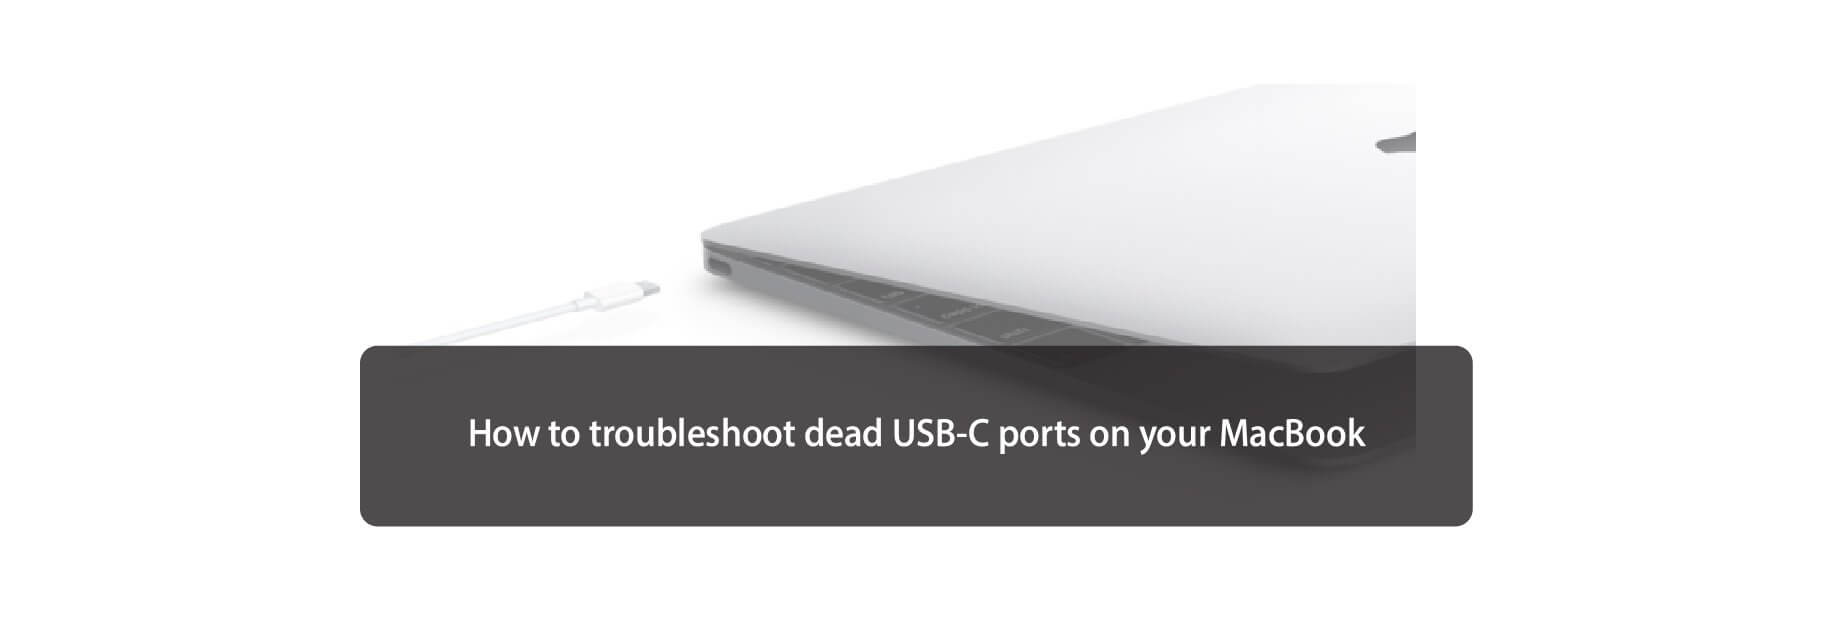 How to troubleshoot dead USB-C ports on your MacBook